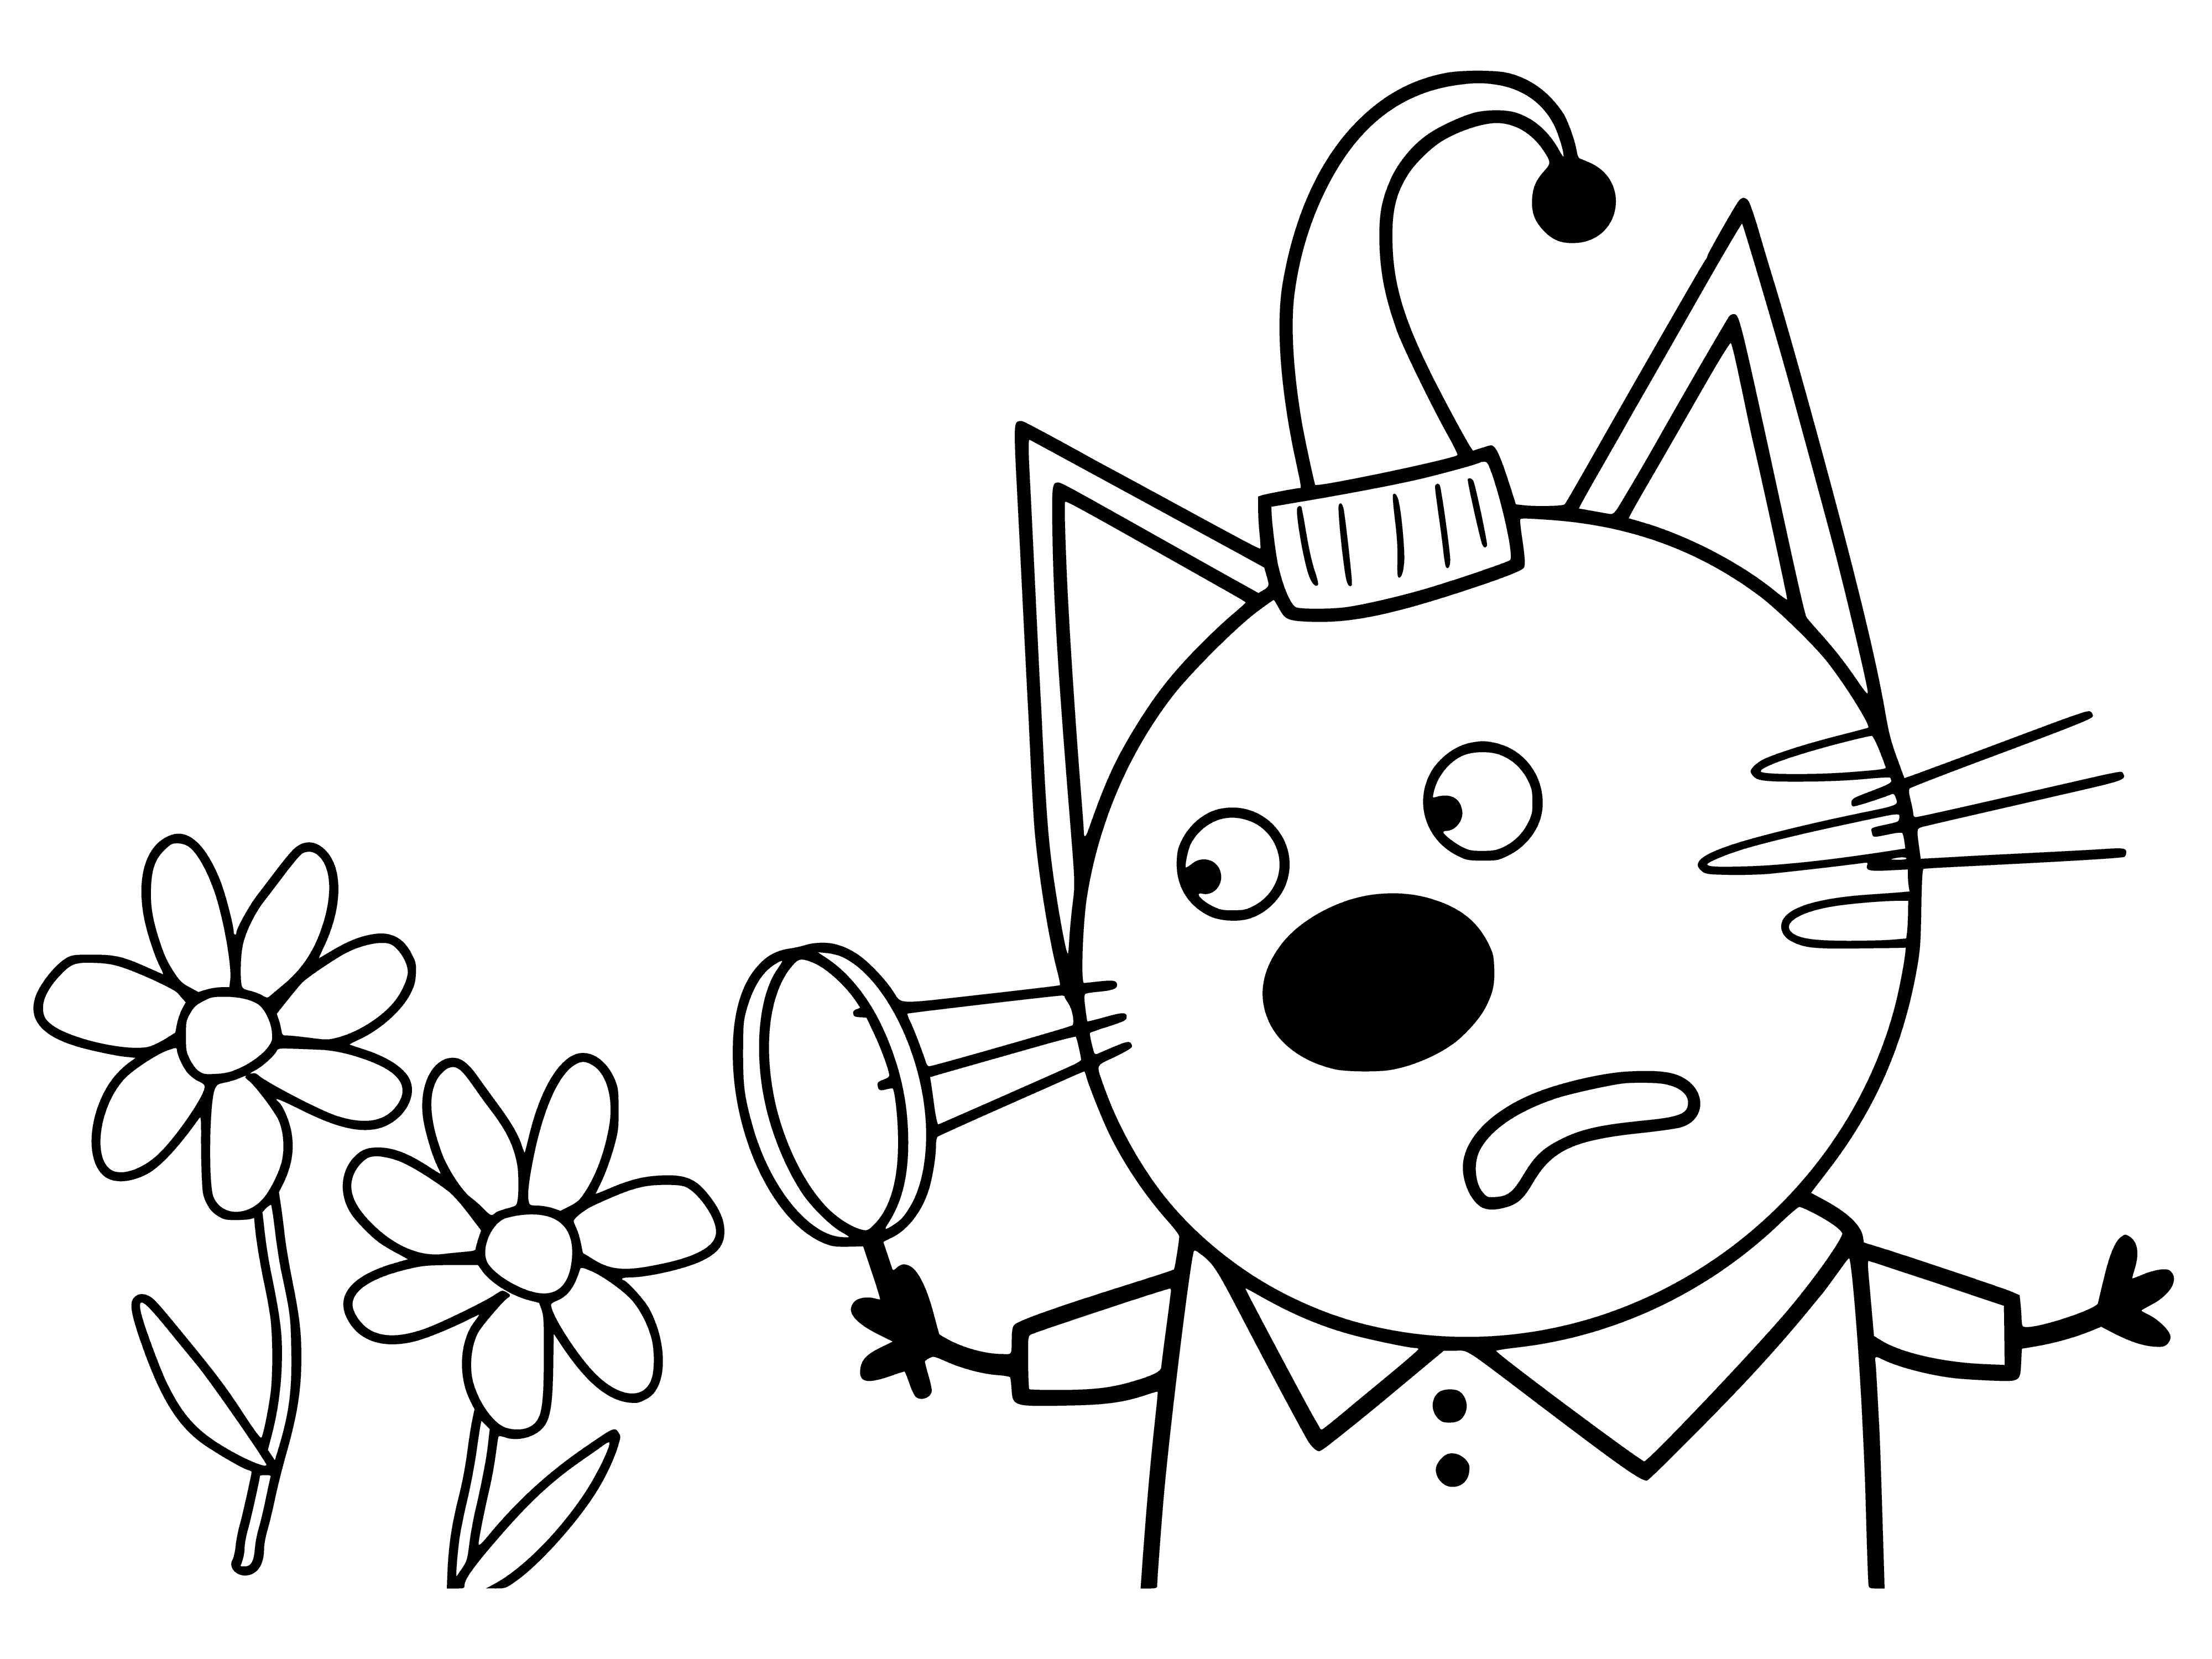 coloring page: Three cats: one brown-white, one black-white, one gray. Brown-white sniffs yellow flower, black-white looks at gray cat, gray cat looks back. #cats #coloring